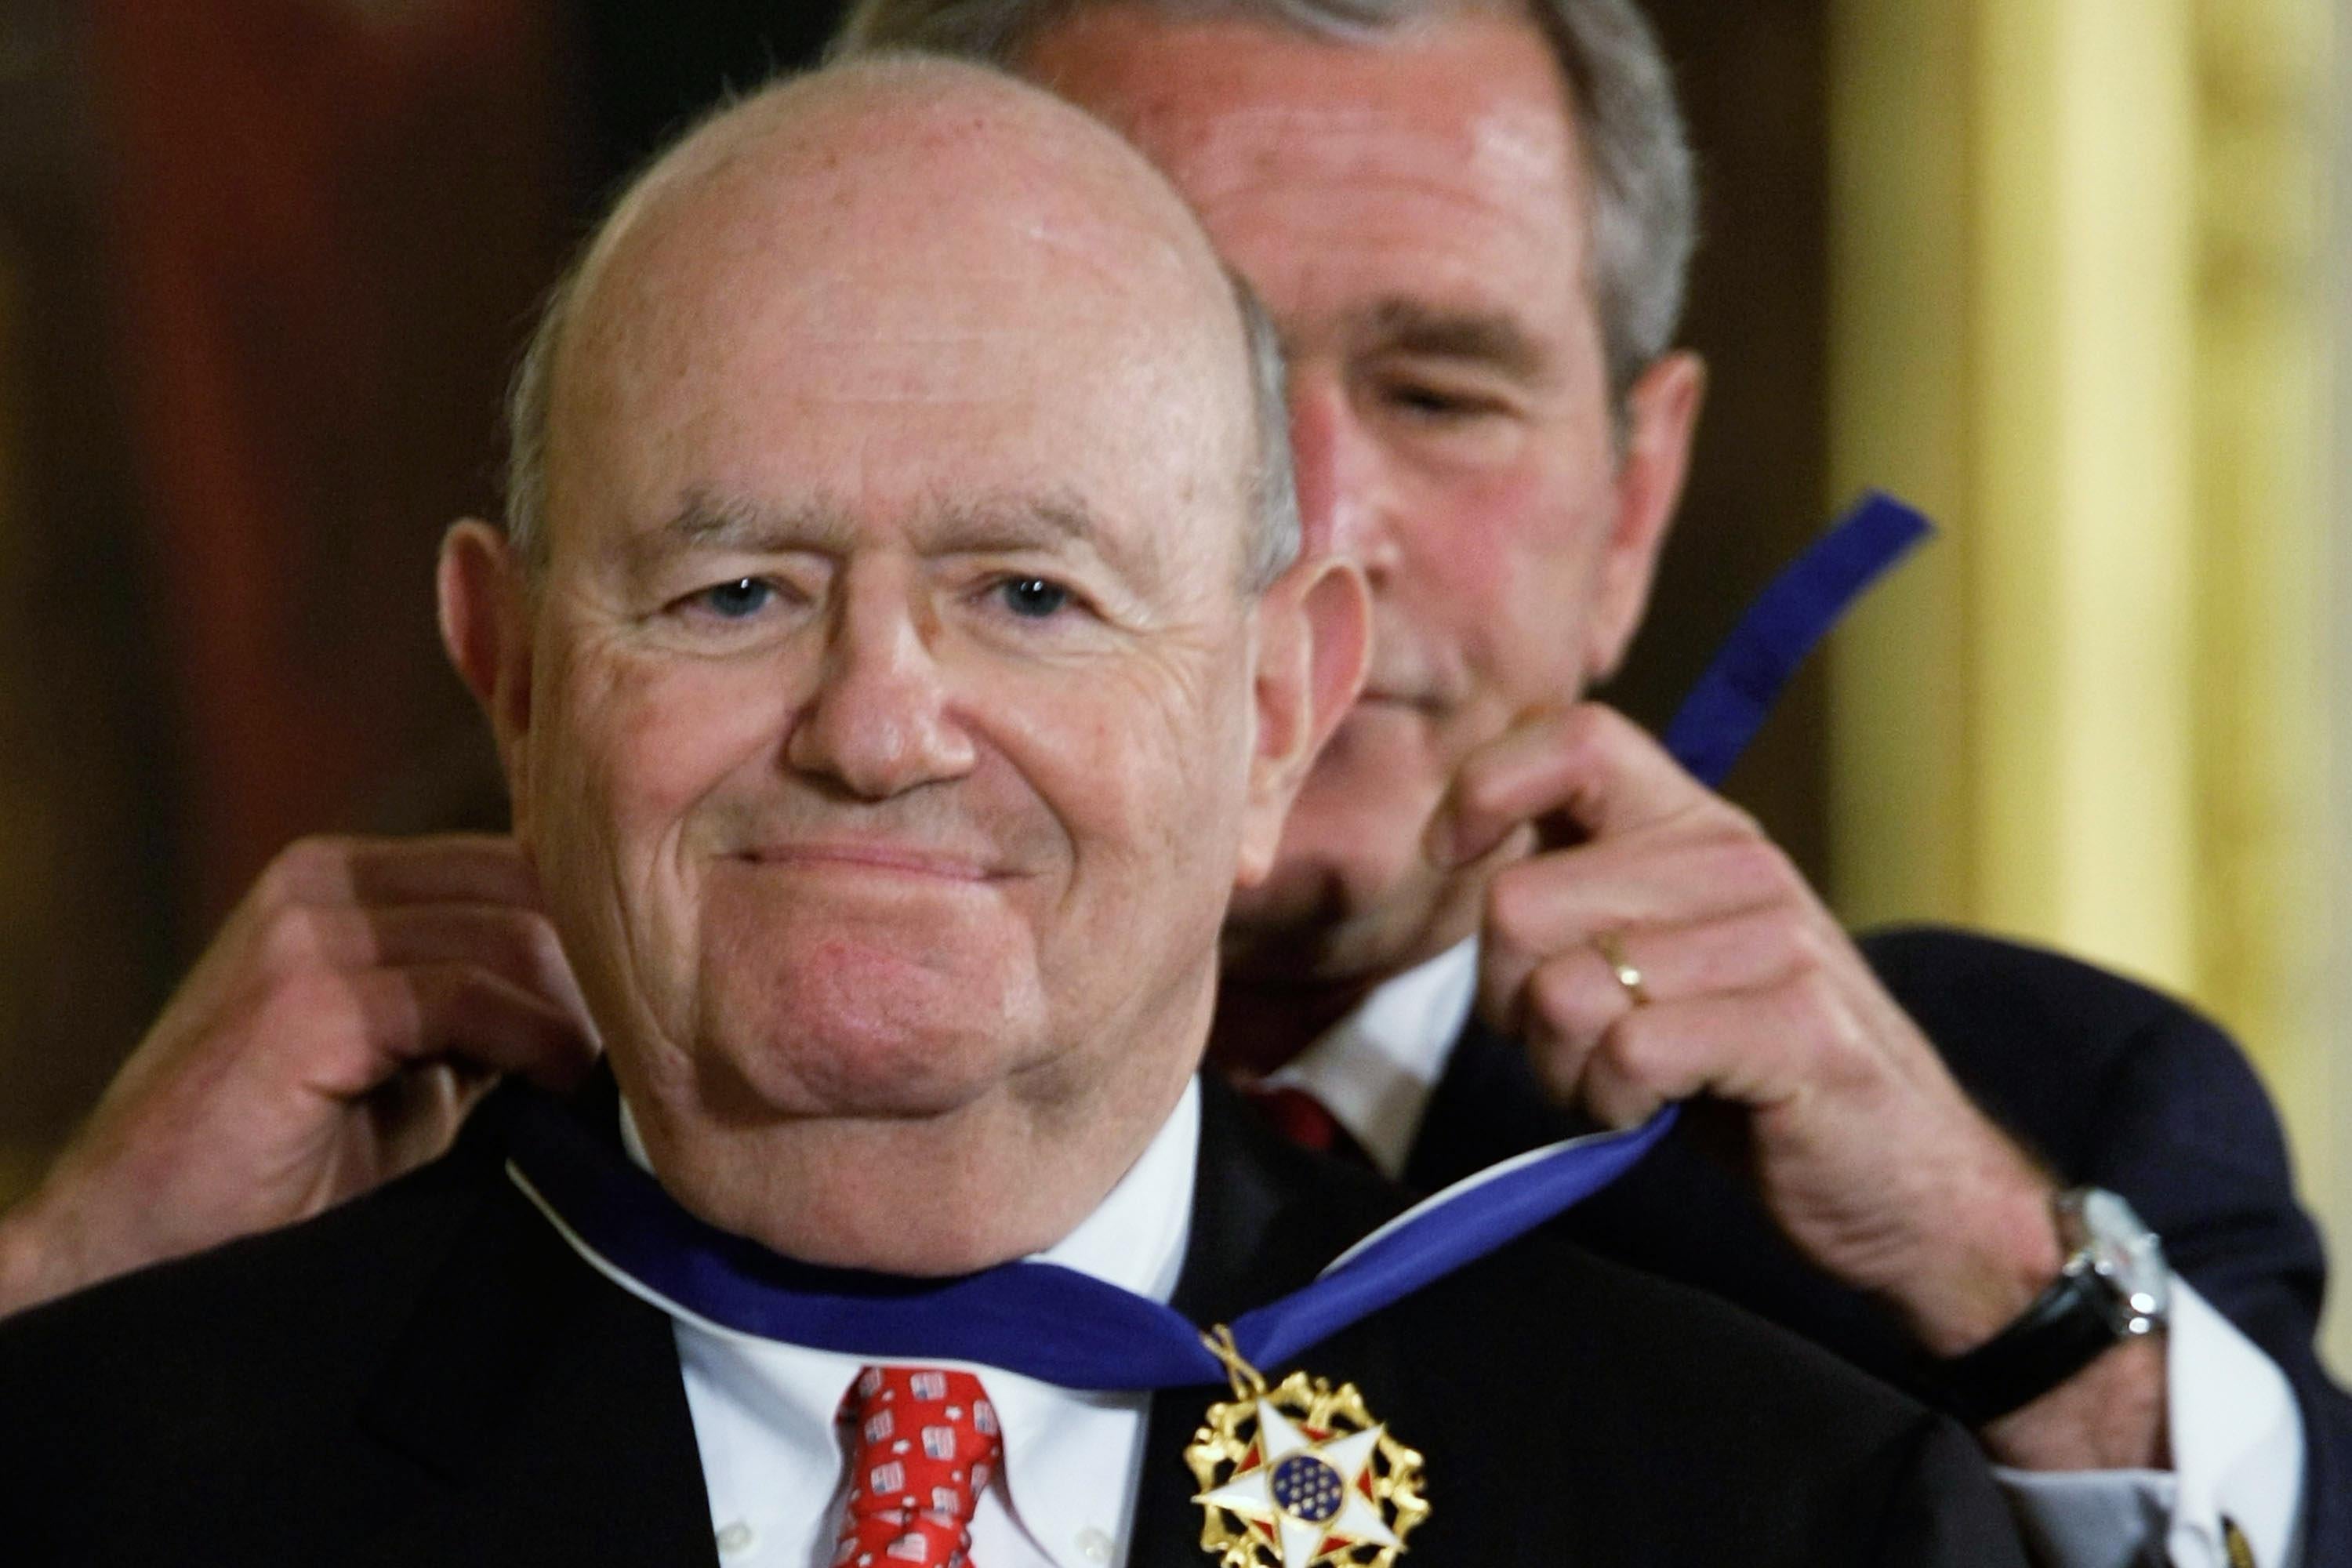 Laurence Silberman smiles while George W. Bush places the Presidential Medal of Freedom around his neck.